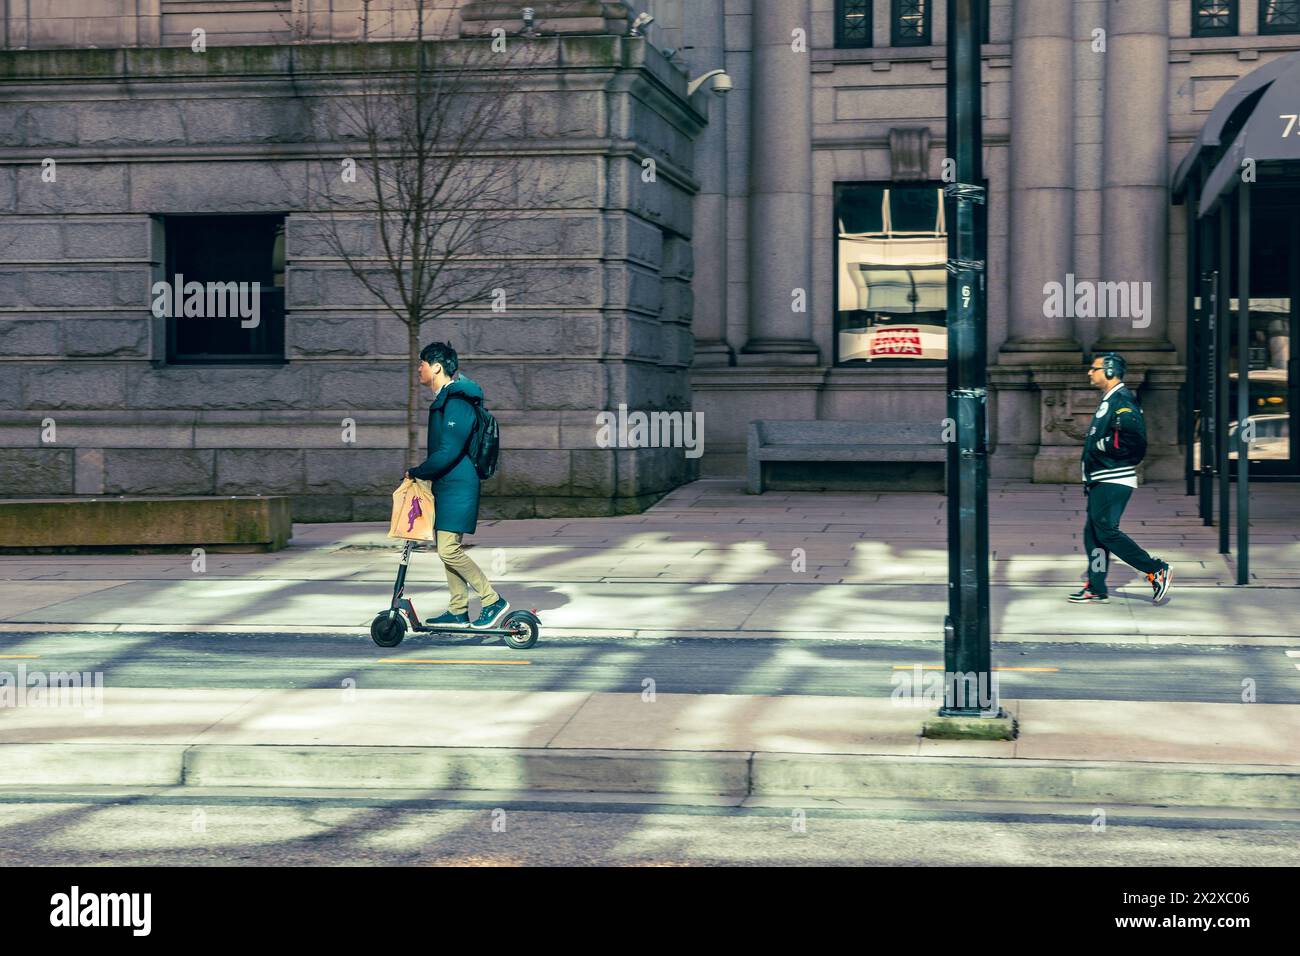 A man riding an electric scooter in the Hornby Street bike lane, in front of the Vancouver Art Gallery building illuminated by reflected light. Stock Photo